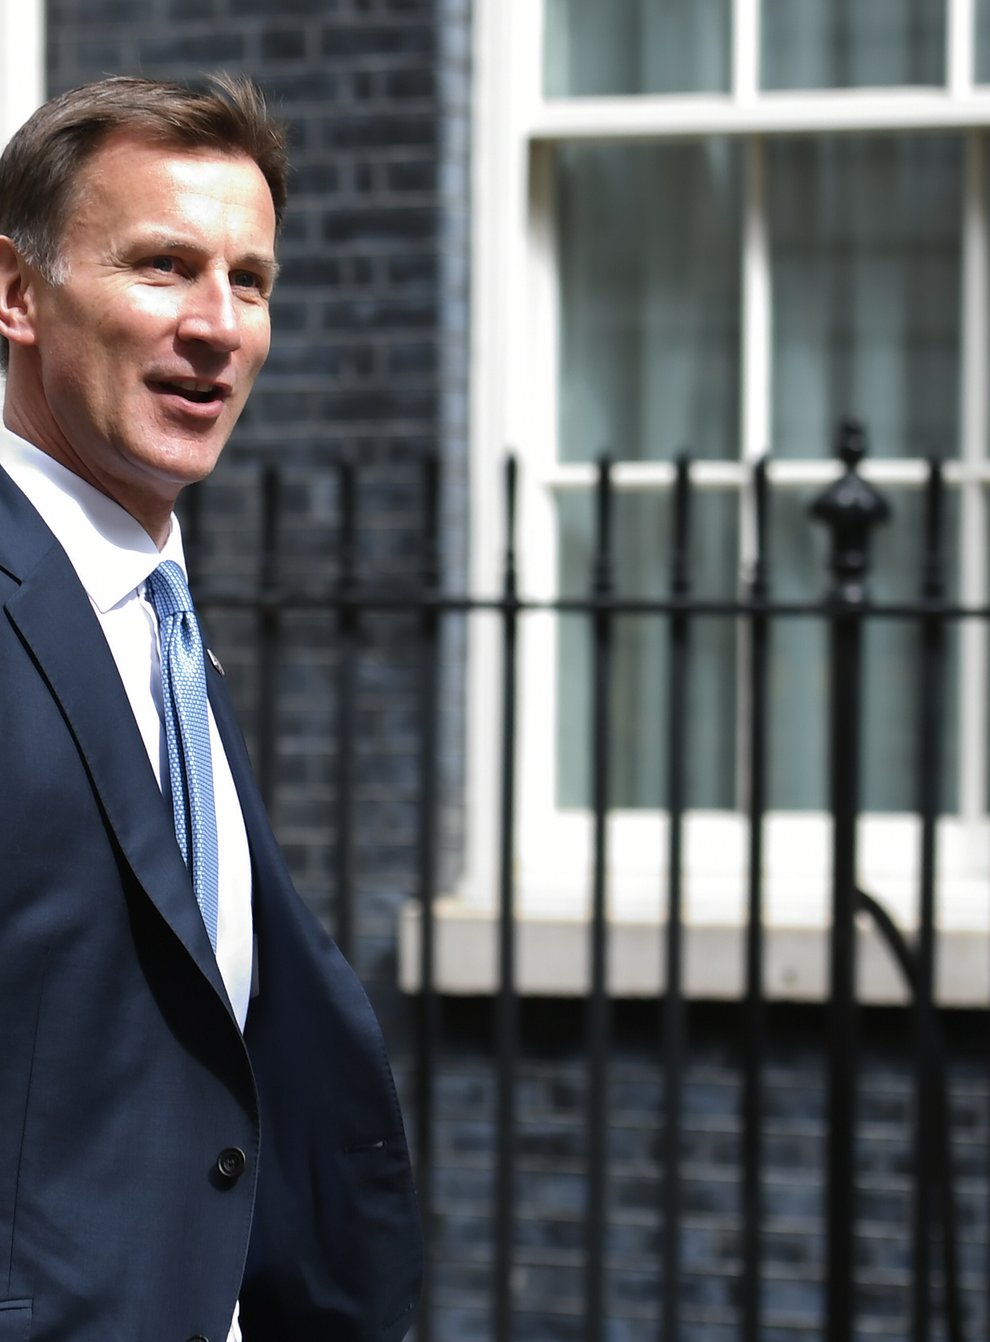 Jeremy Hunt has described sitting at the top of a ‘rogue system’ when he was health secretary and said he was ‘shocked to his core’ by failures in care (Stefan Rousseau/PA)